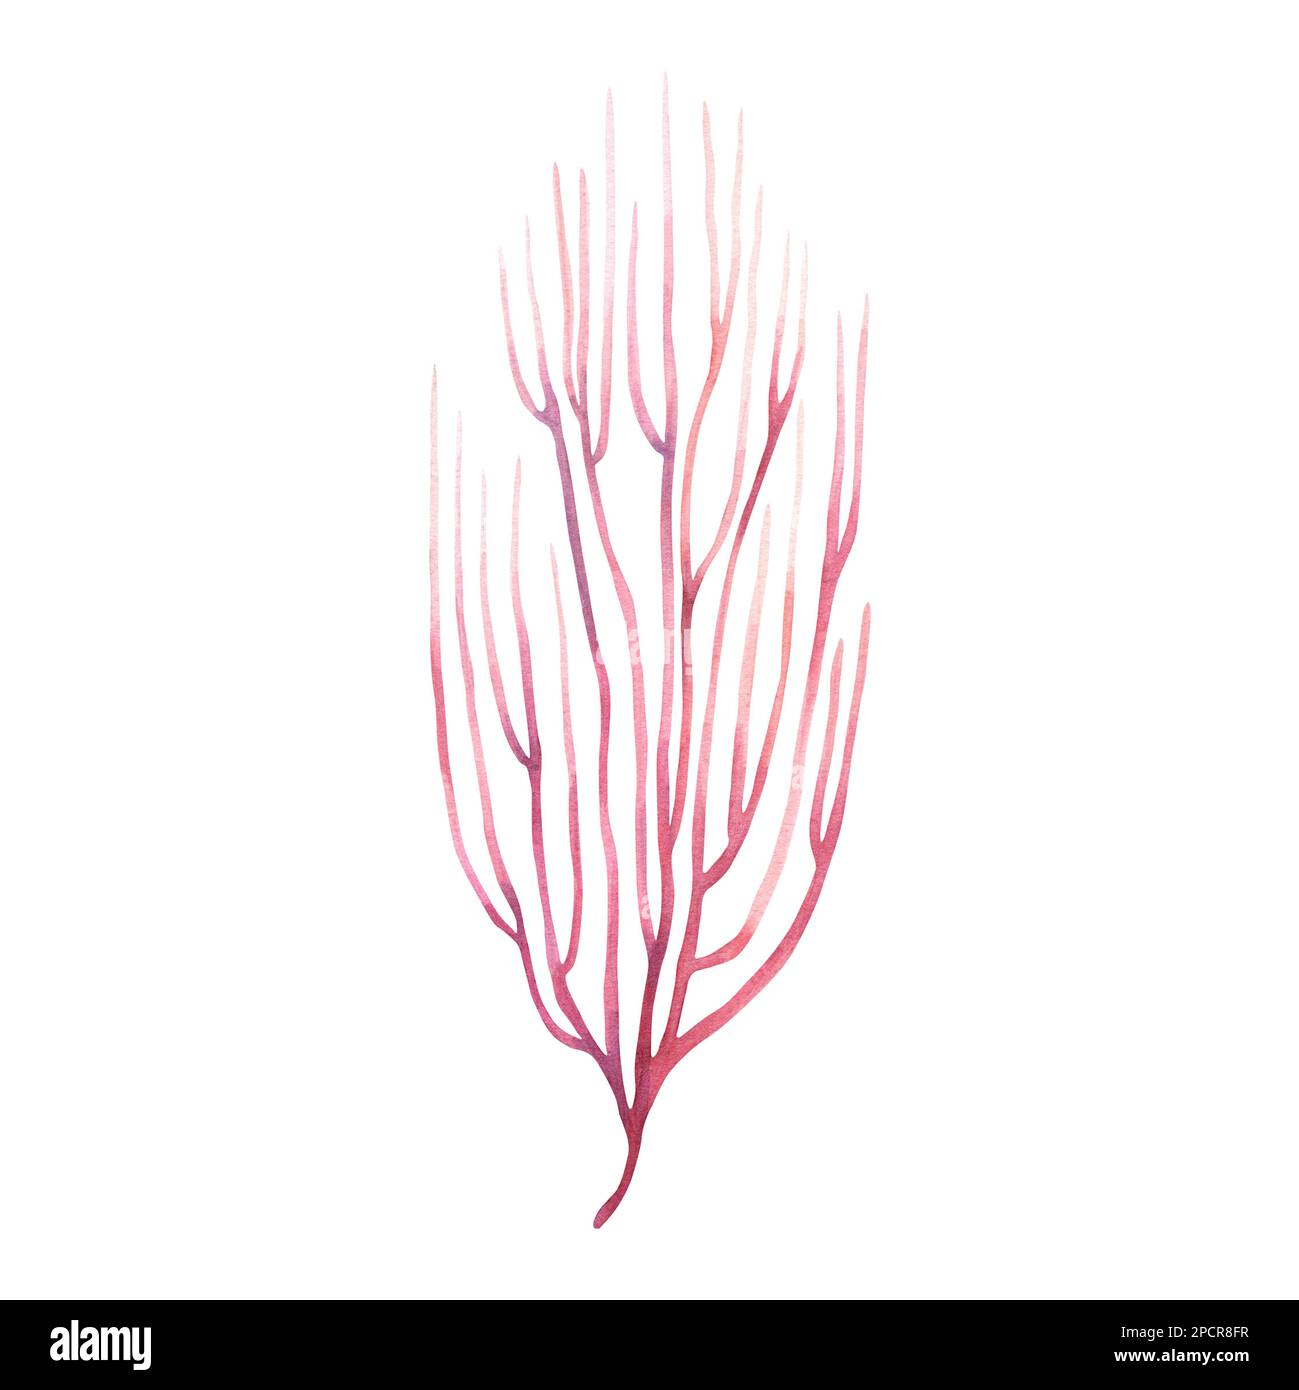 Sea fan ,coral reef organizm. Watercolor illustration isolated on white background Stock Photo